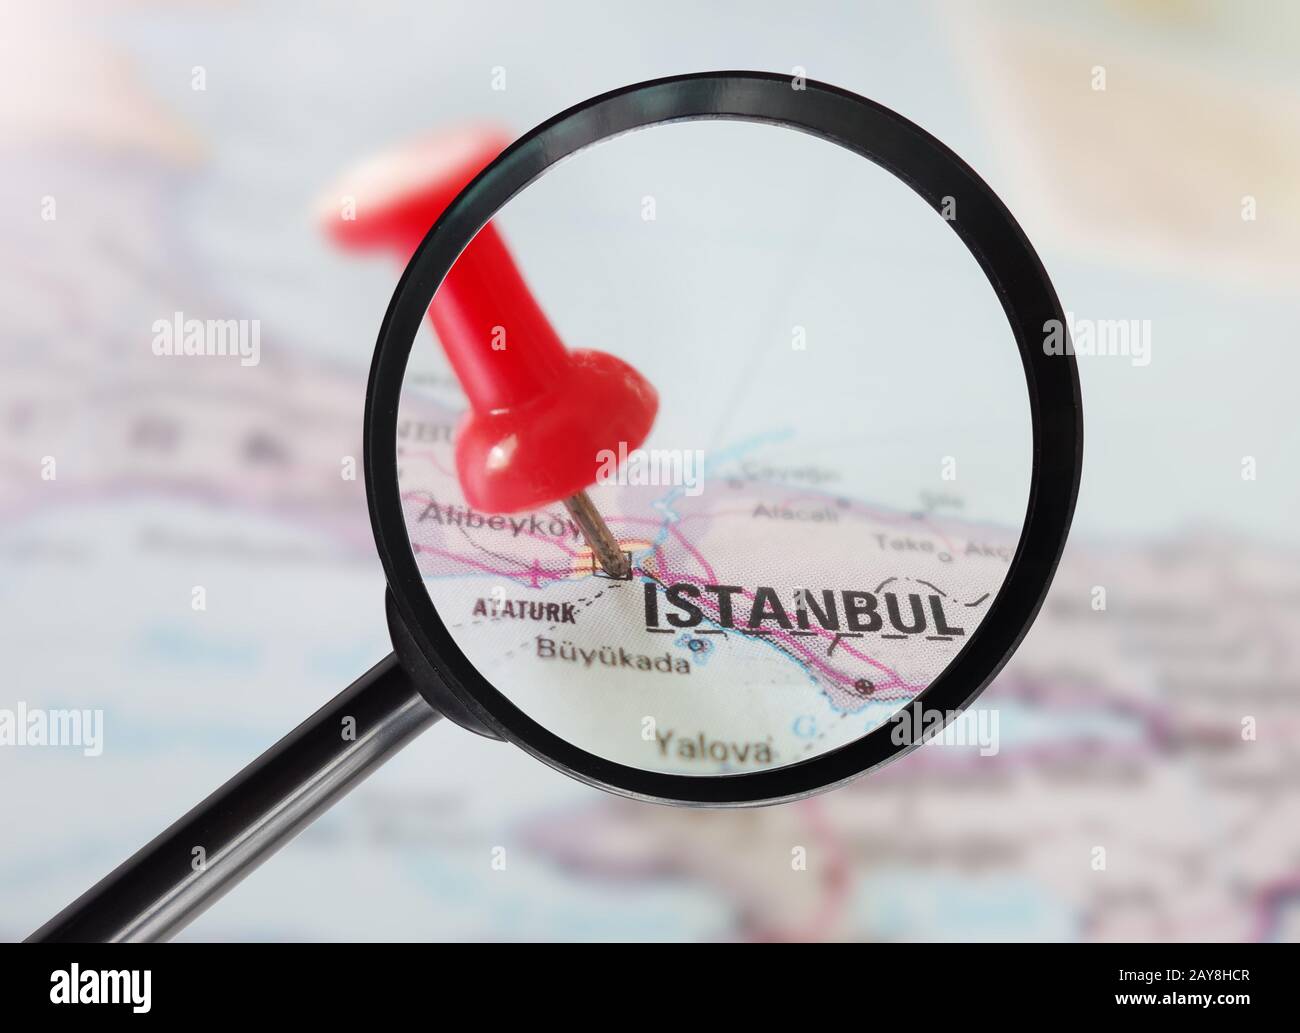 Istanbul Turkey magnified Stock Photo